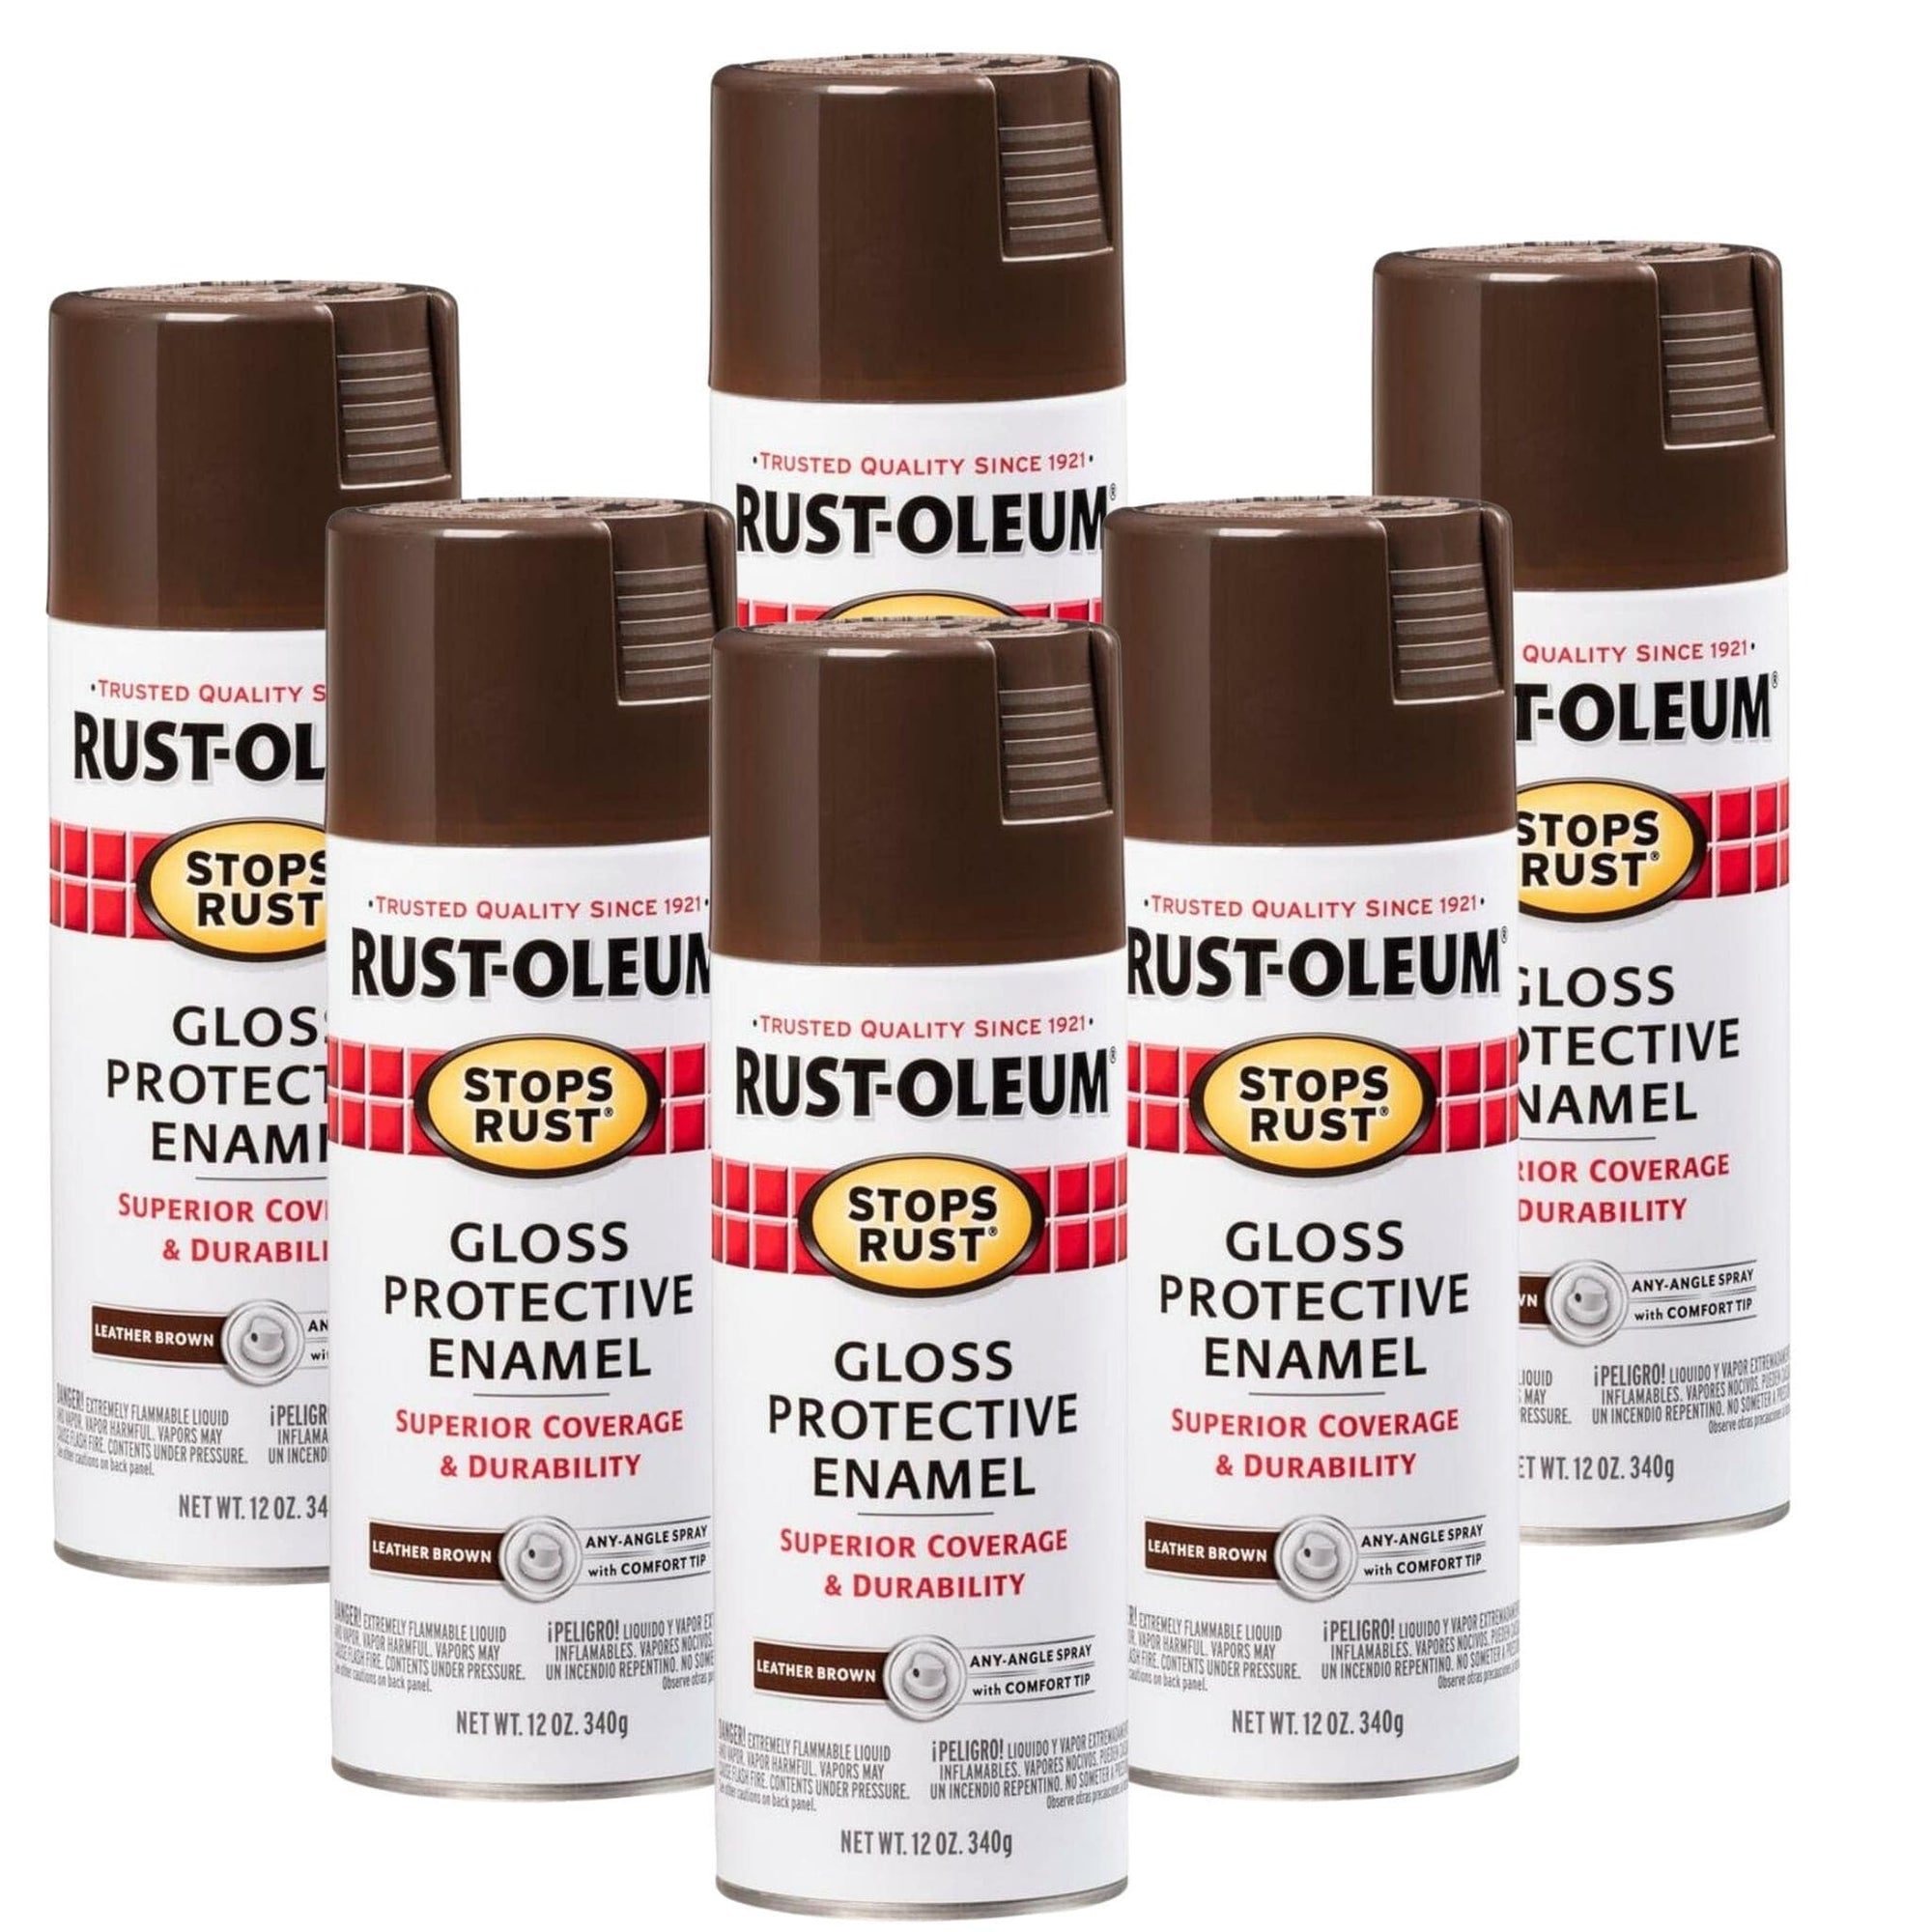 Rustoleum Stops Rust Spray Paint Protective Enamel - Gloss Leather Brown (6 Cans) - South East Clearance Centre